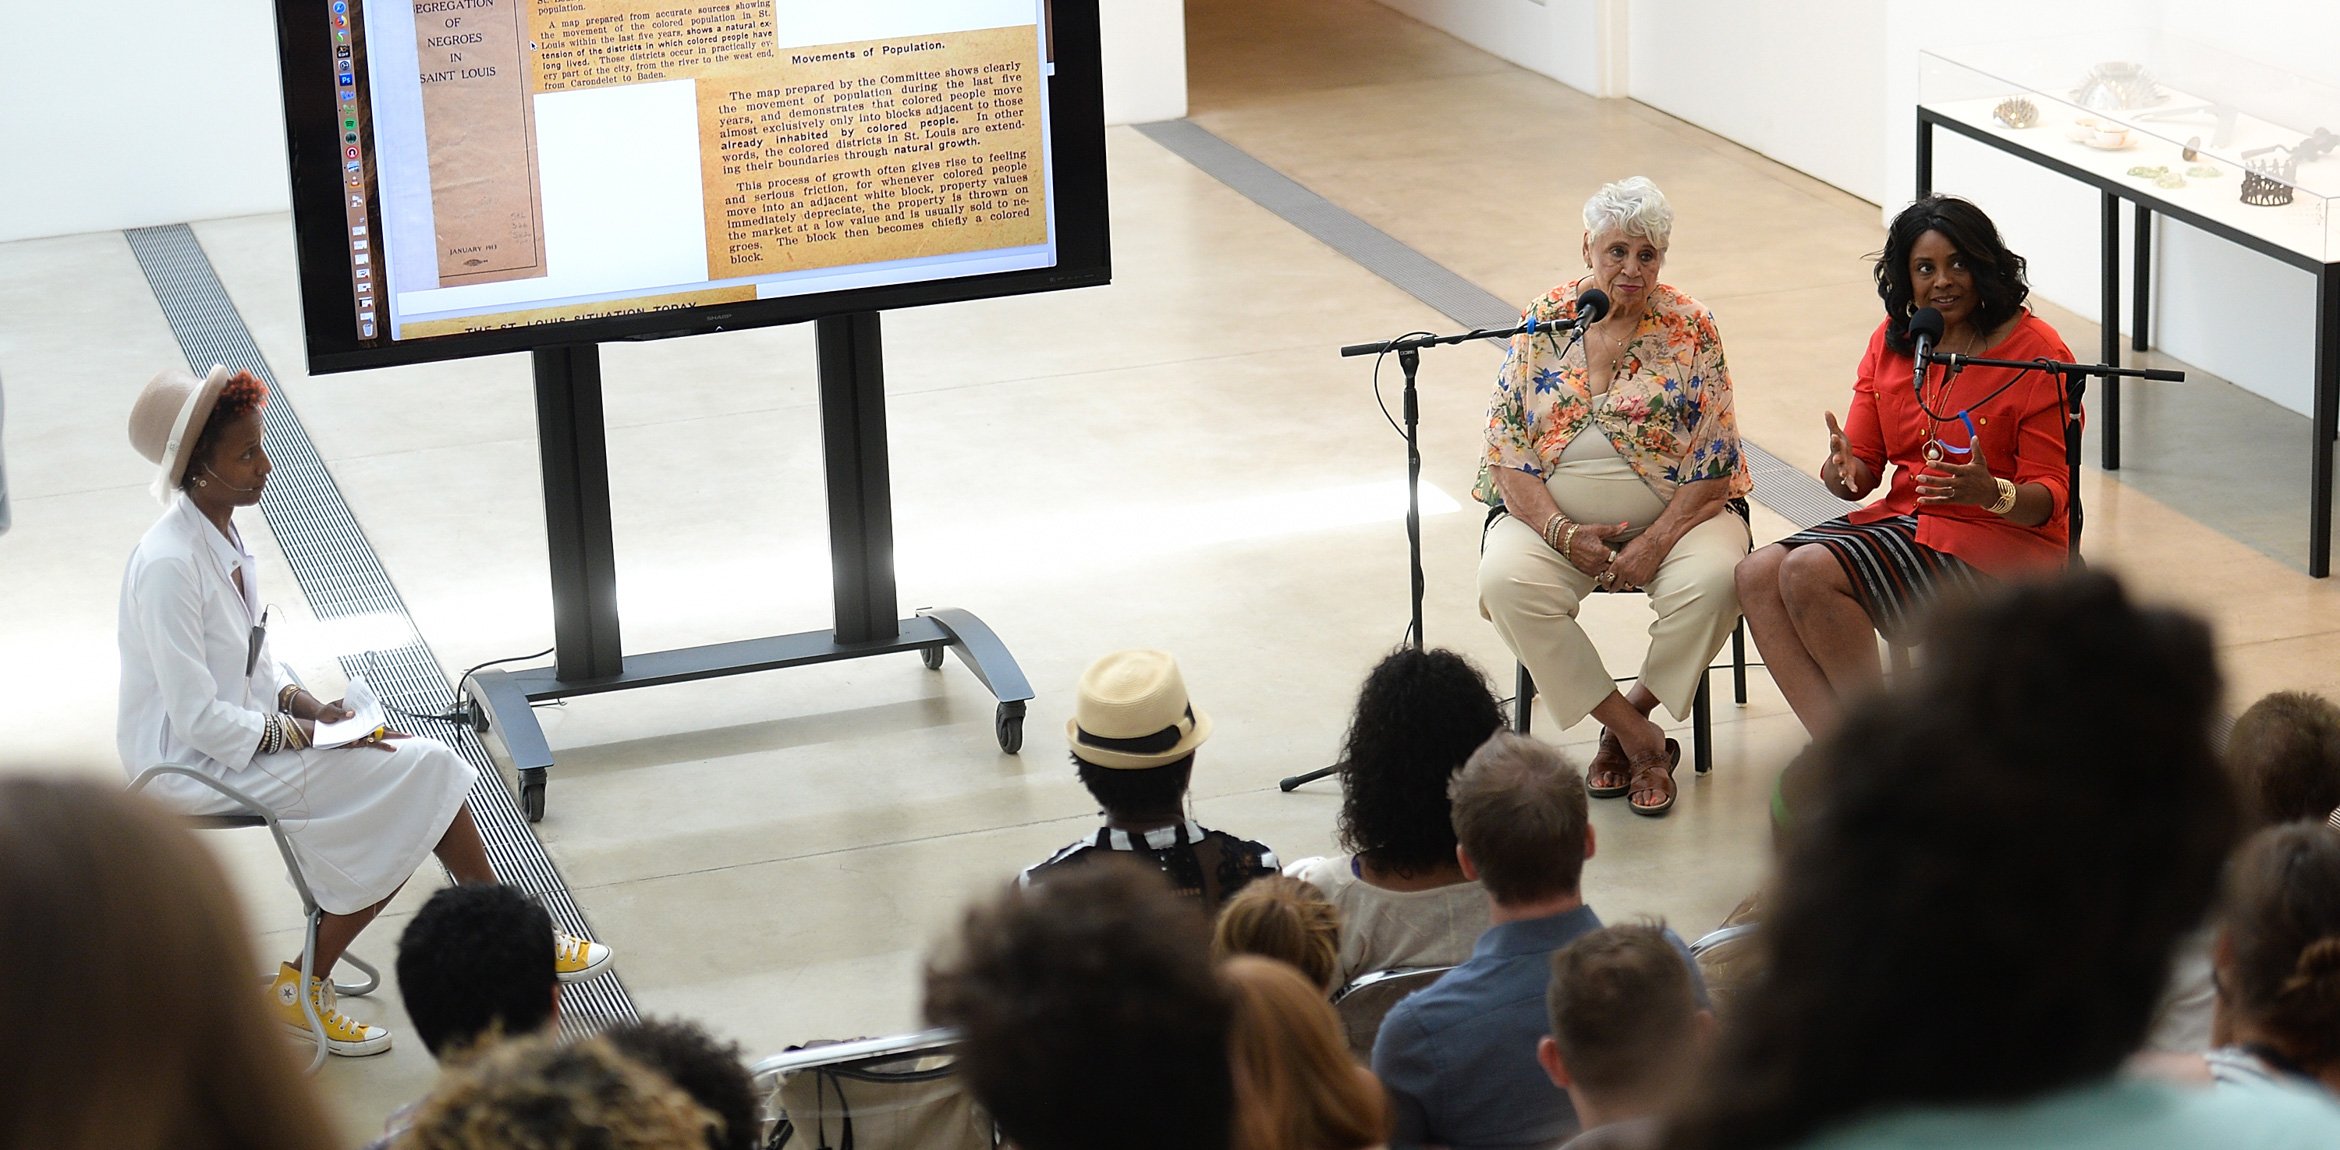 Activist Tara Tee sits to the left of a large monitor in the Lower Main Gallery, and two participants sit to the right and speak into microphones to the audience on the Main Staircase.